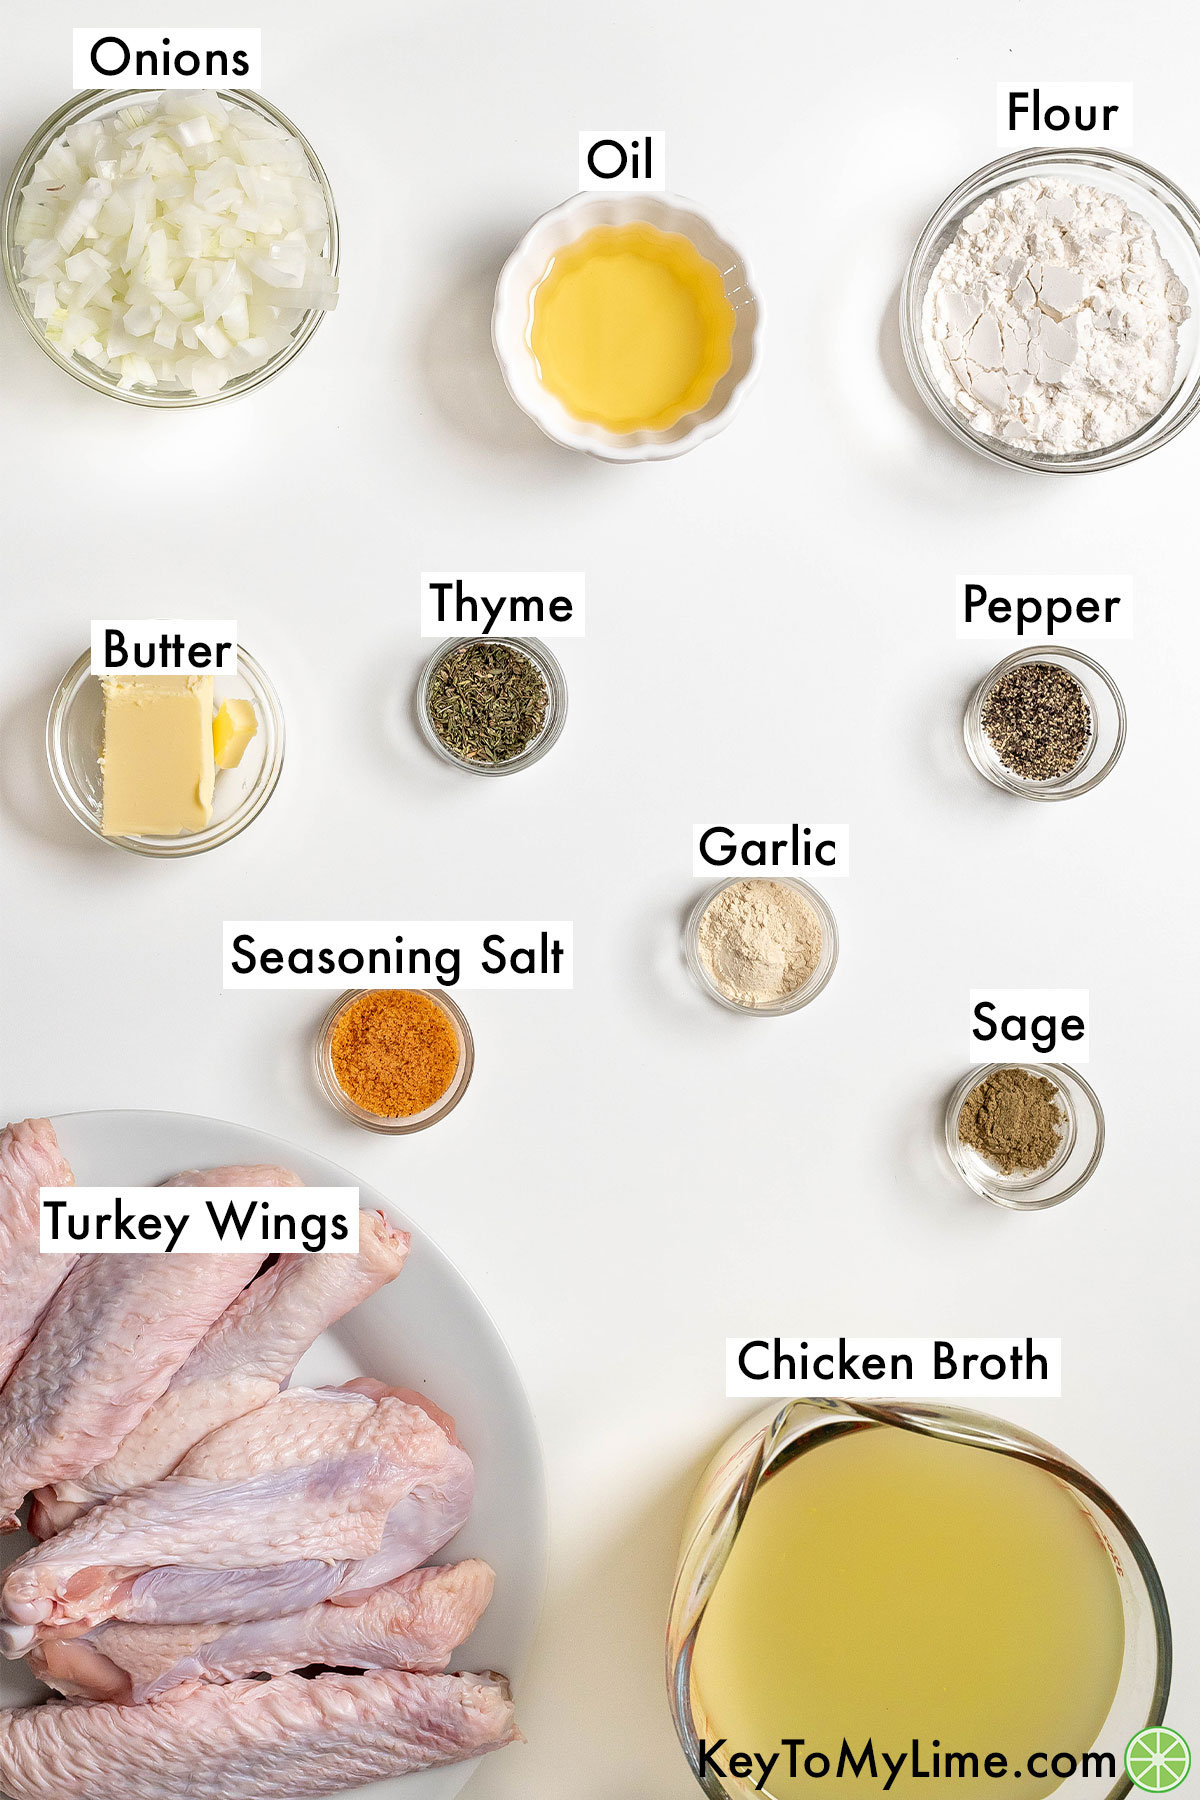 The labeled ingredients for crockpot turkey wings.